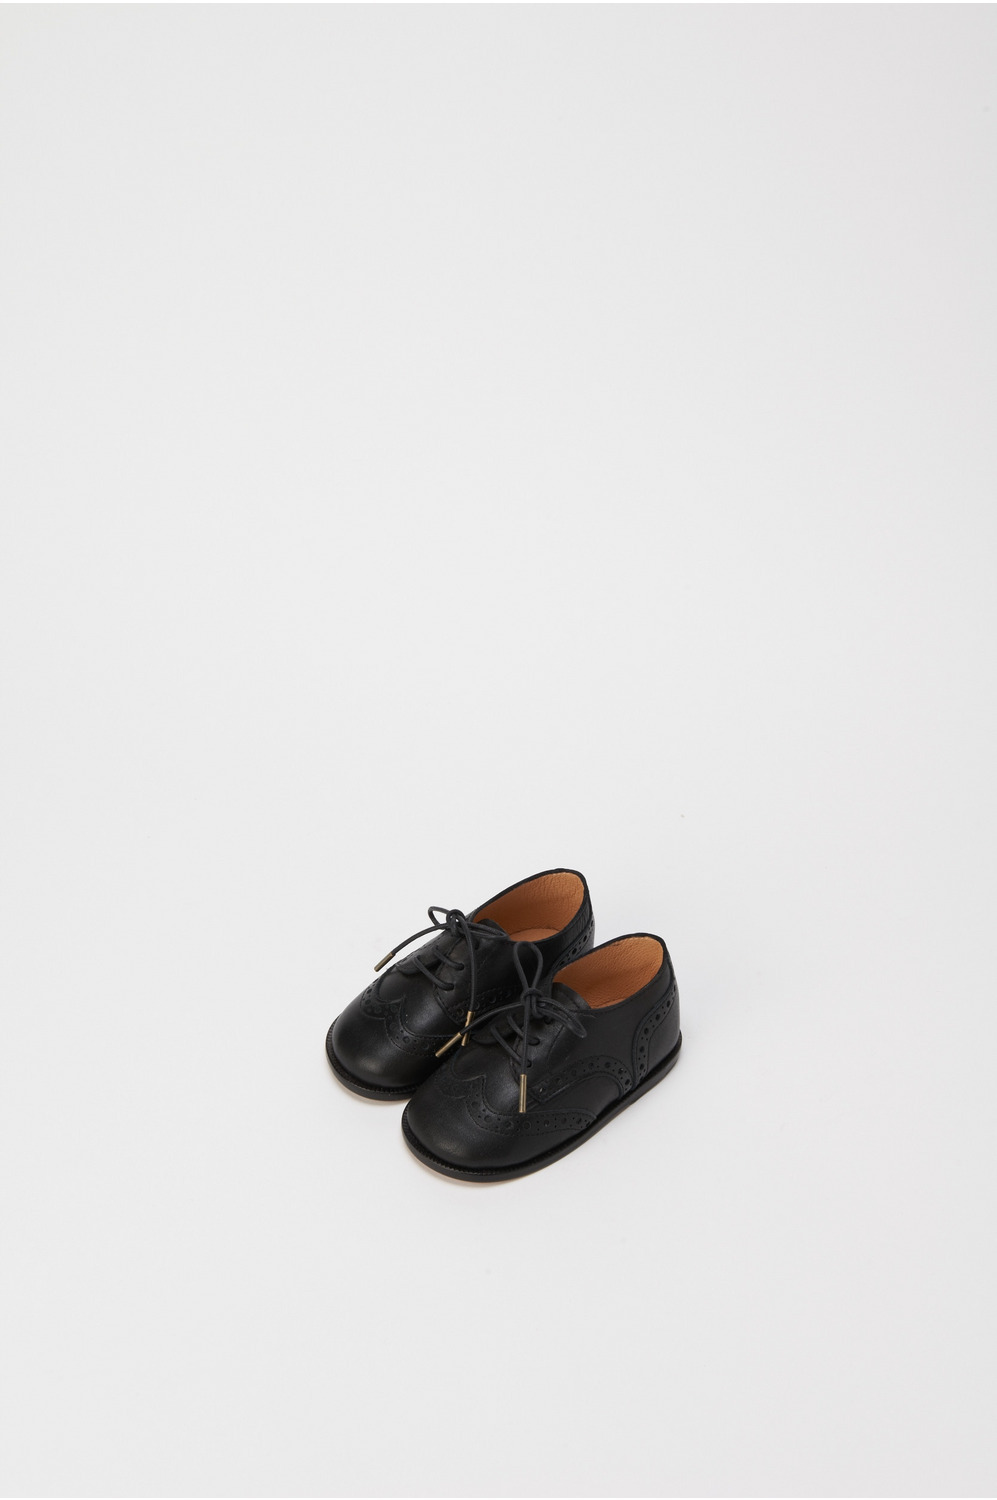 First Shoes 詳細画像 black 1